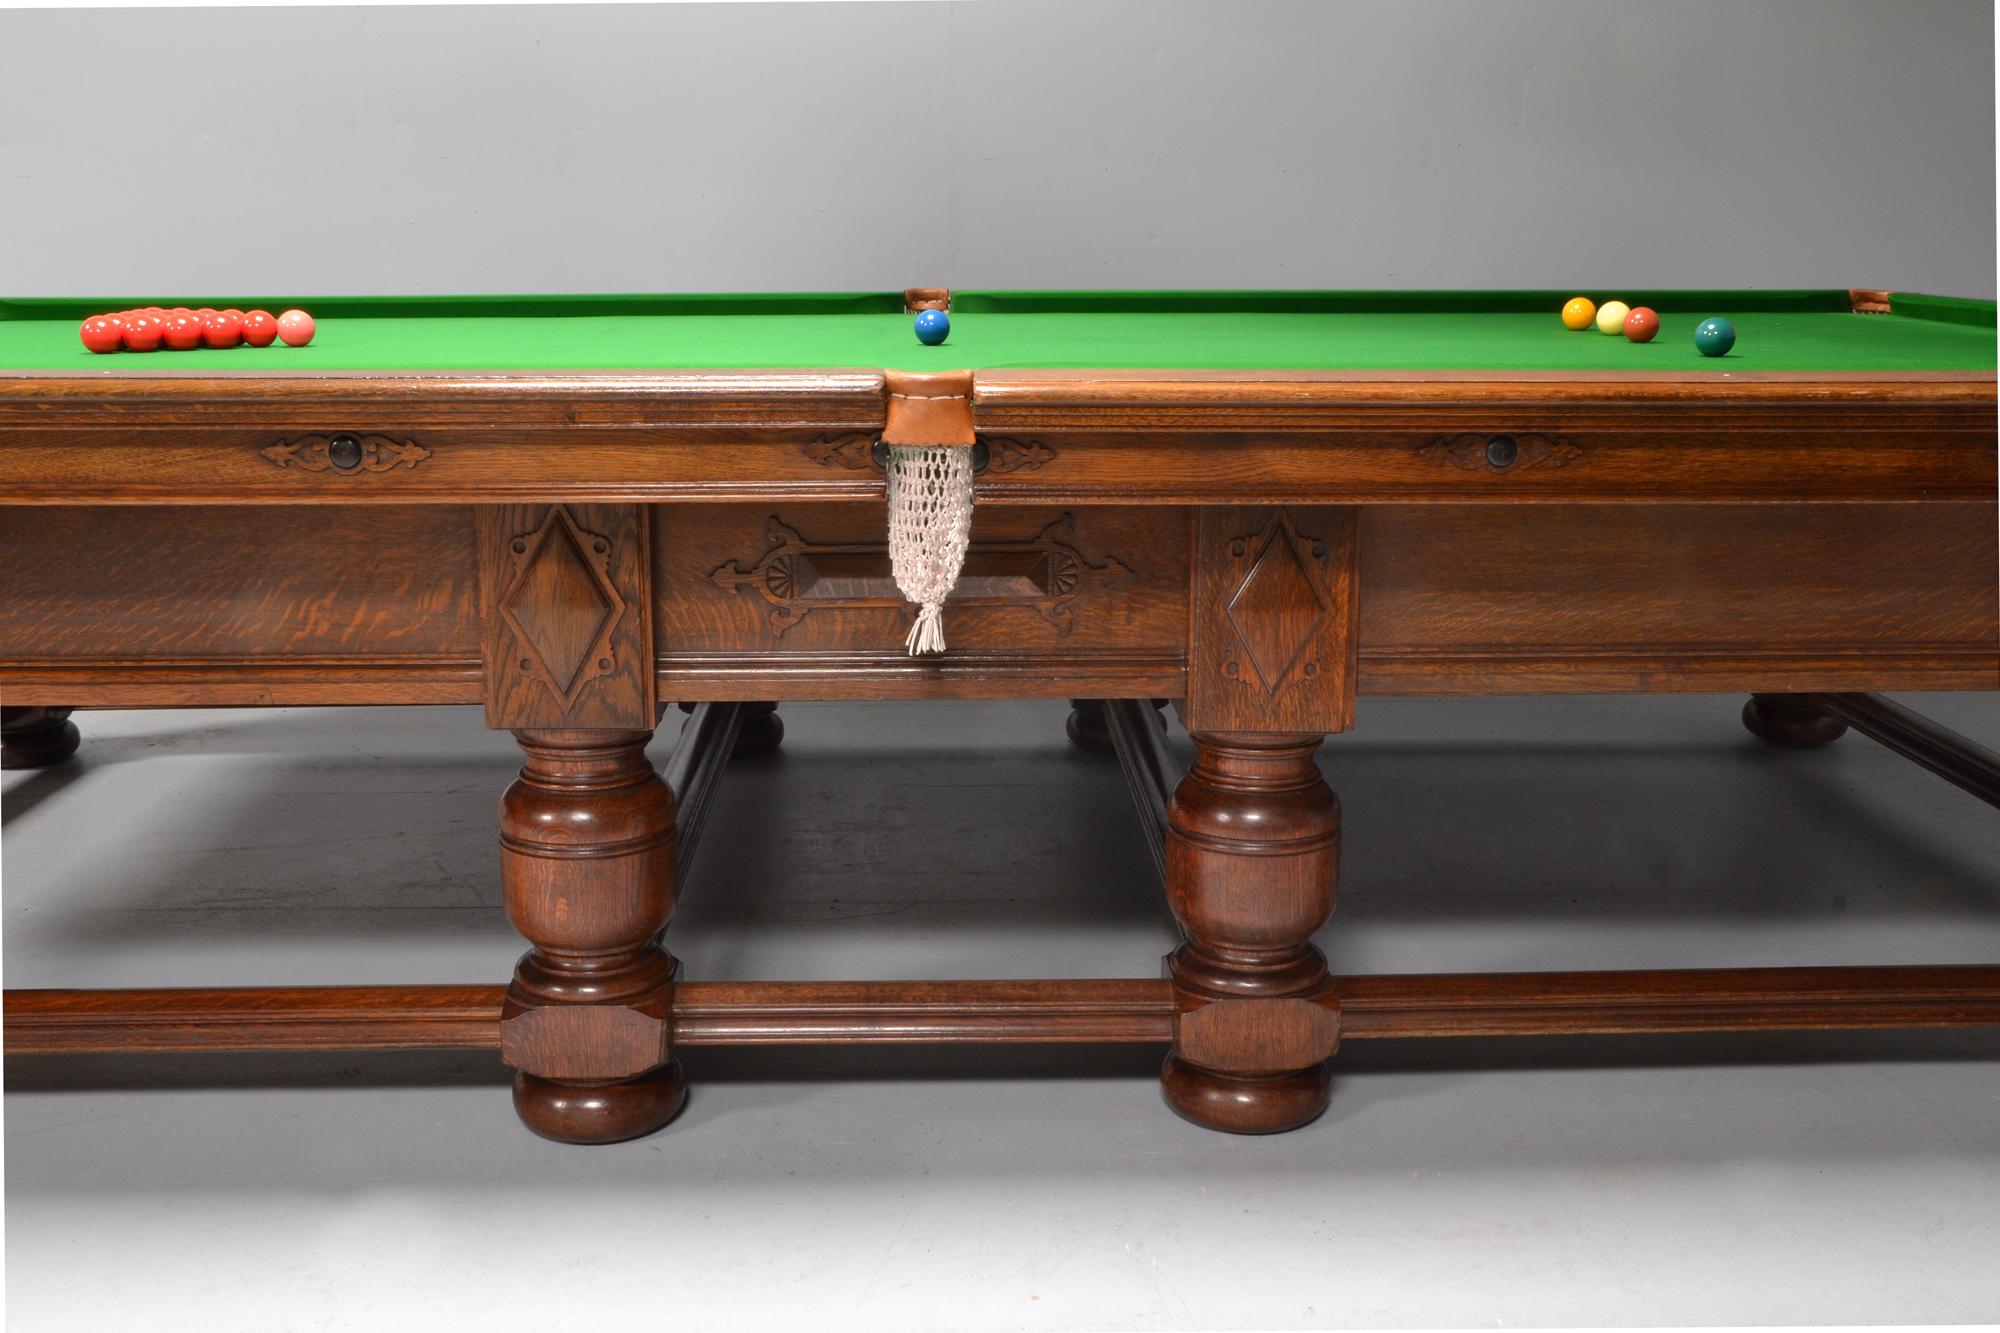 A rare solid oak full size billiard or snooker table of refectory or Jacobean form by the 